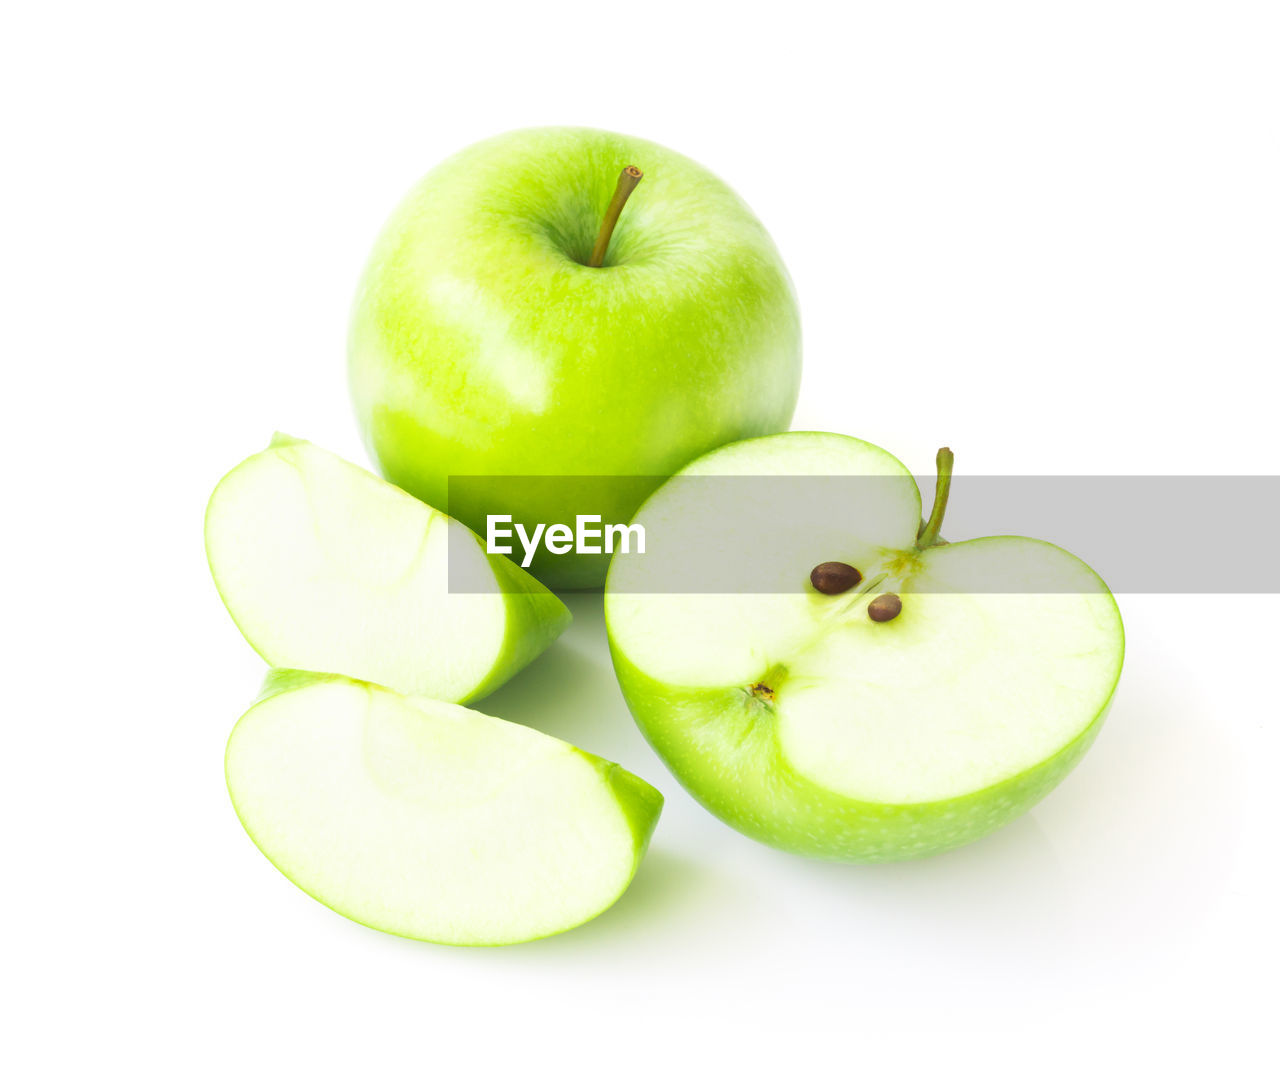 High angle view of granny smith apples against white background